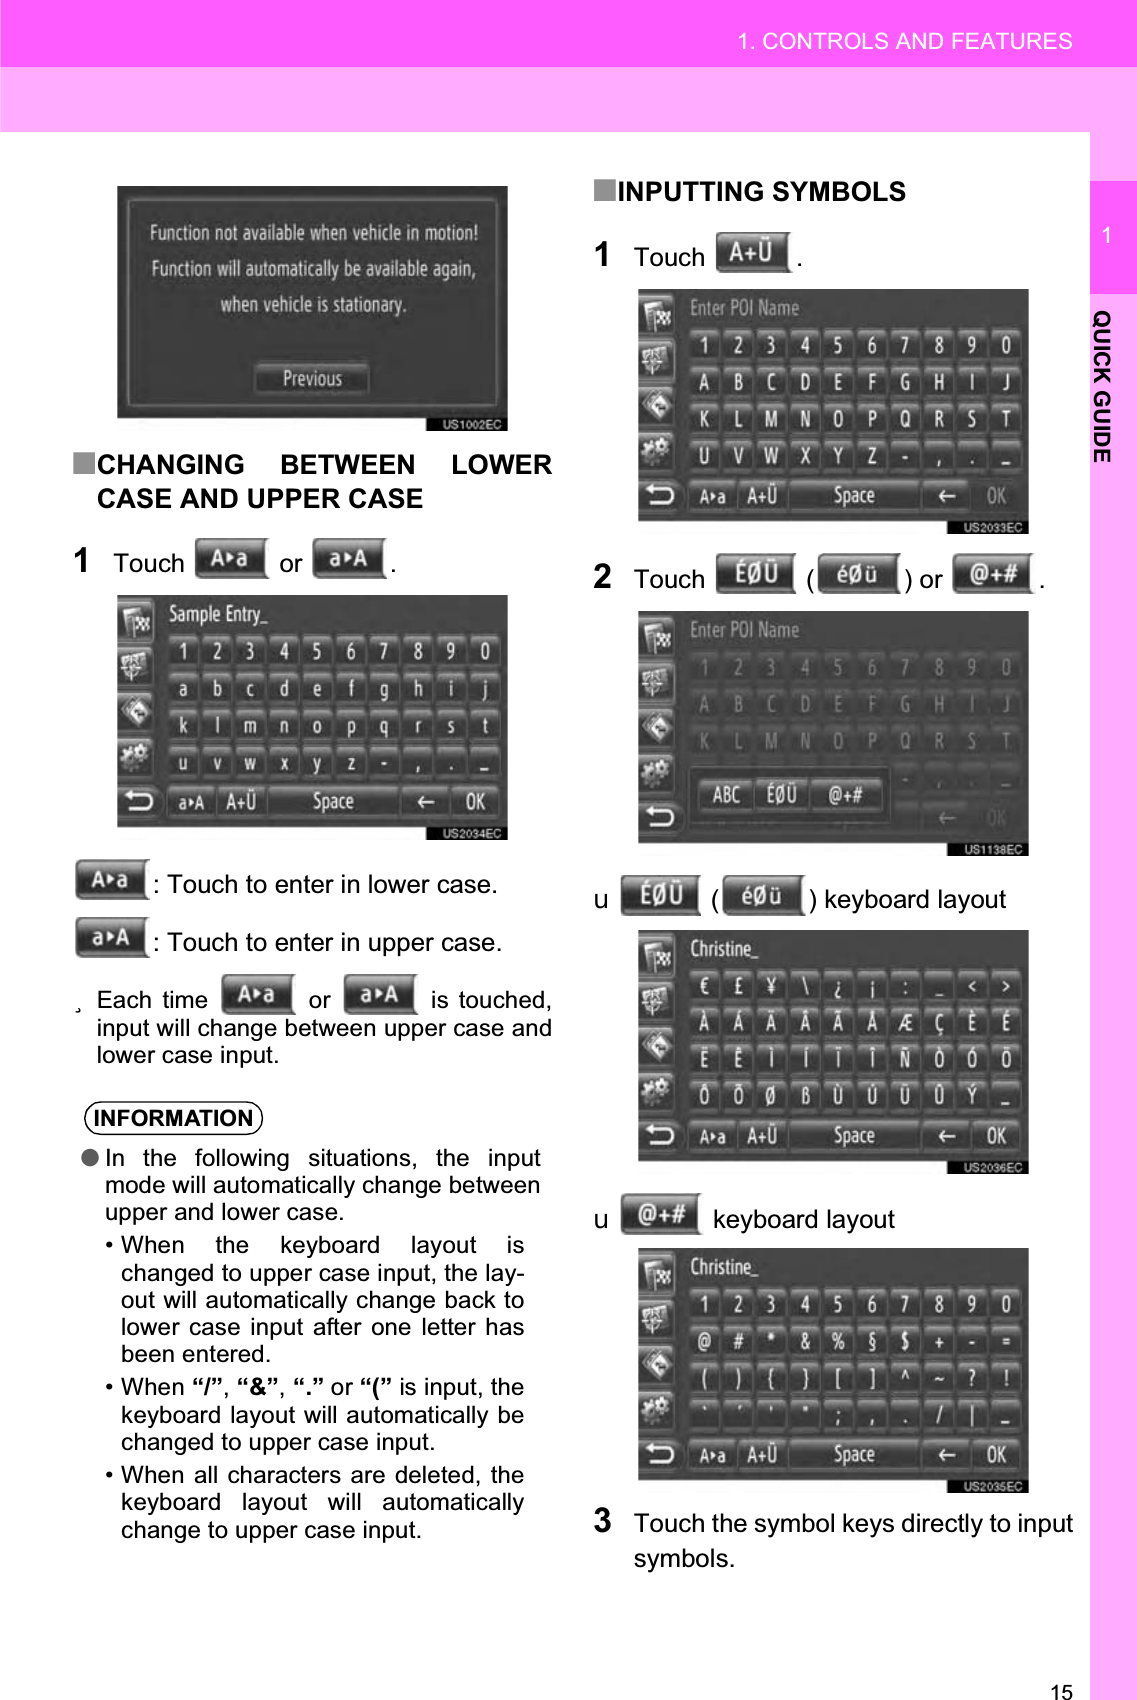 151. CONTROLS AND FEATURES1QUICK GUIDE■CHANGING BETWEEN LOWERCASE AND UPPER CASE1Touch  or .: Touch to enter in lower case.: Touch to enter in upper case.zEach time   or   is touched,input will change between upper case andlower case input.■INPUTTING SYMBOLS1Touch .2Touch   ( ) or  .X ( ) keyboard layoutXkeyboard layout 3Touch the symbol keys directly to inputsymbols.INFORMATION●In the following situations, the inputmode will automatically change betweenupper and lower case.• When the keyboard layout ischanged to upper case input, the lay-out will automatically change back tolower case input after one letter hasbeen entered.• When “/”,“&amp;”,“.” or “(” is input, thekeyboard layout will automatically bechanged to upper case input.• When all characters are deleted, thekeyboard layout will automaticallychange to upper case input.